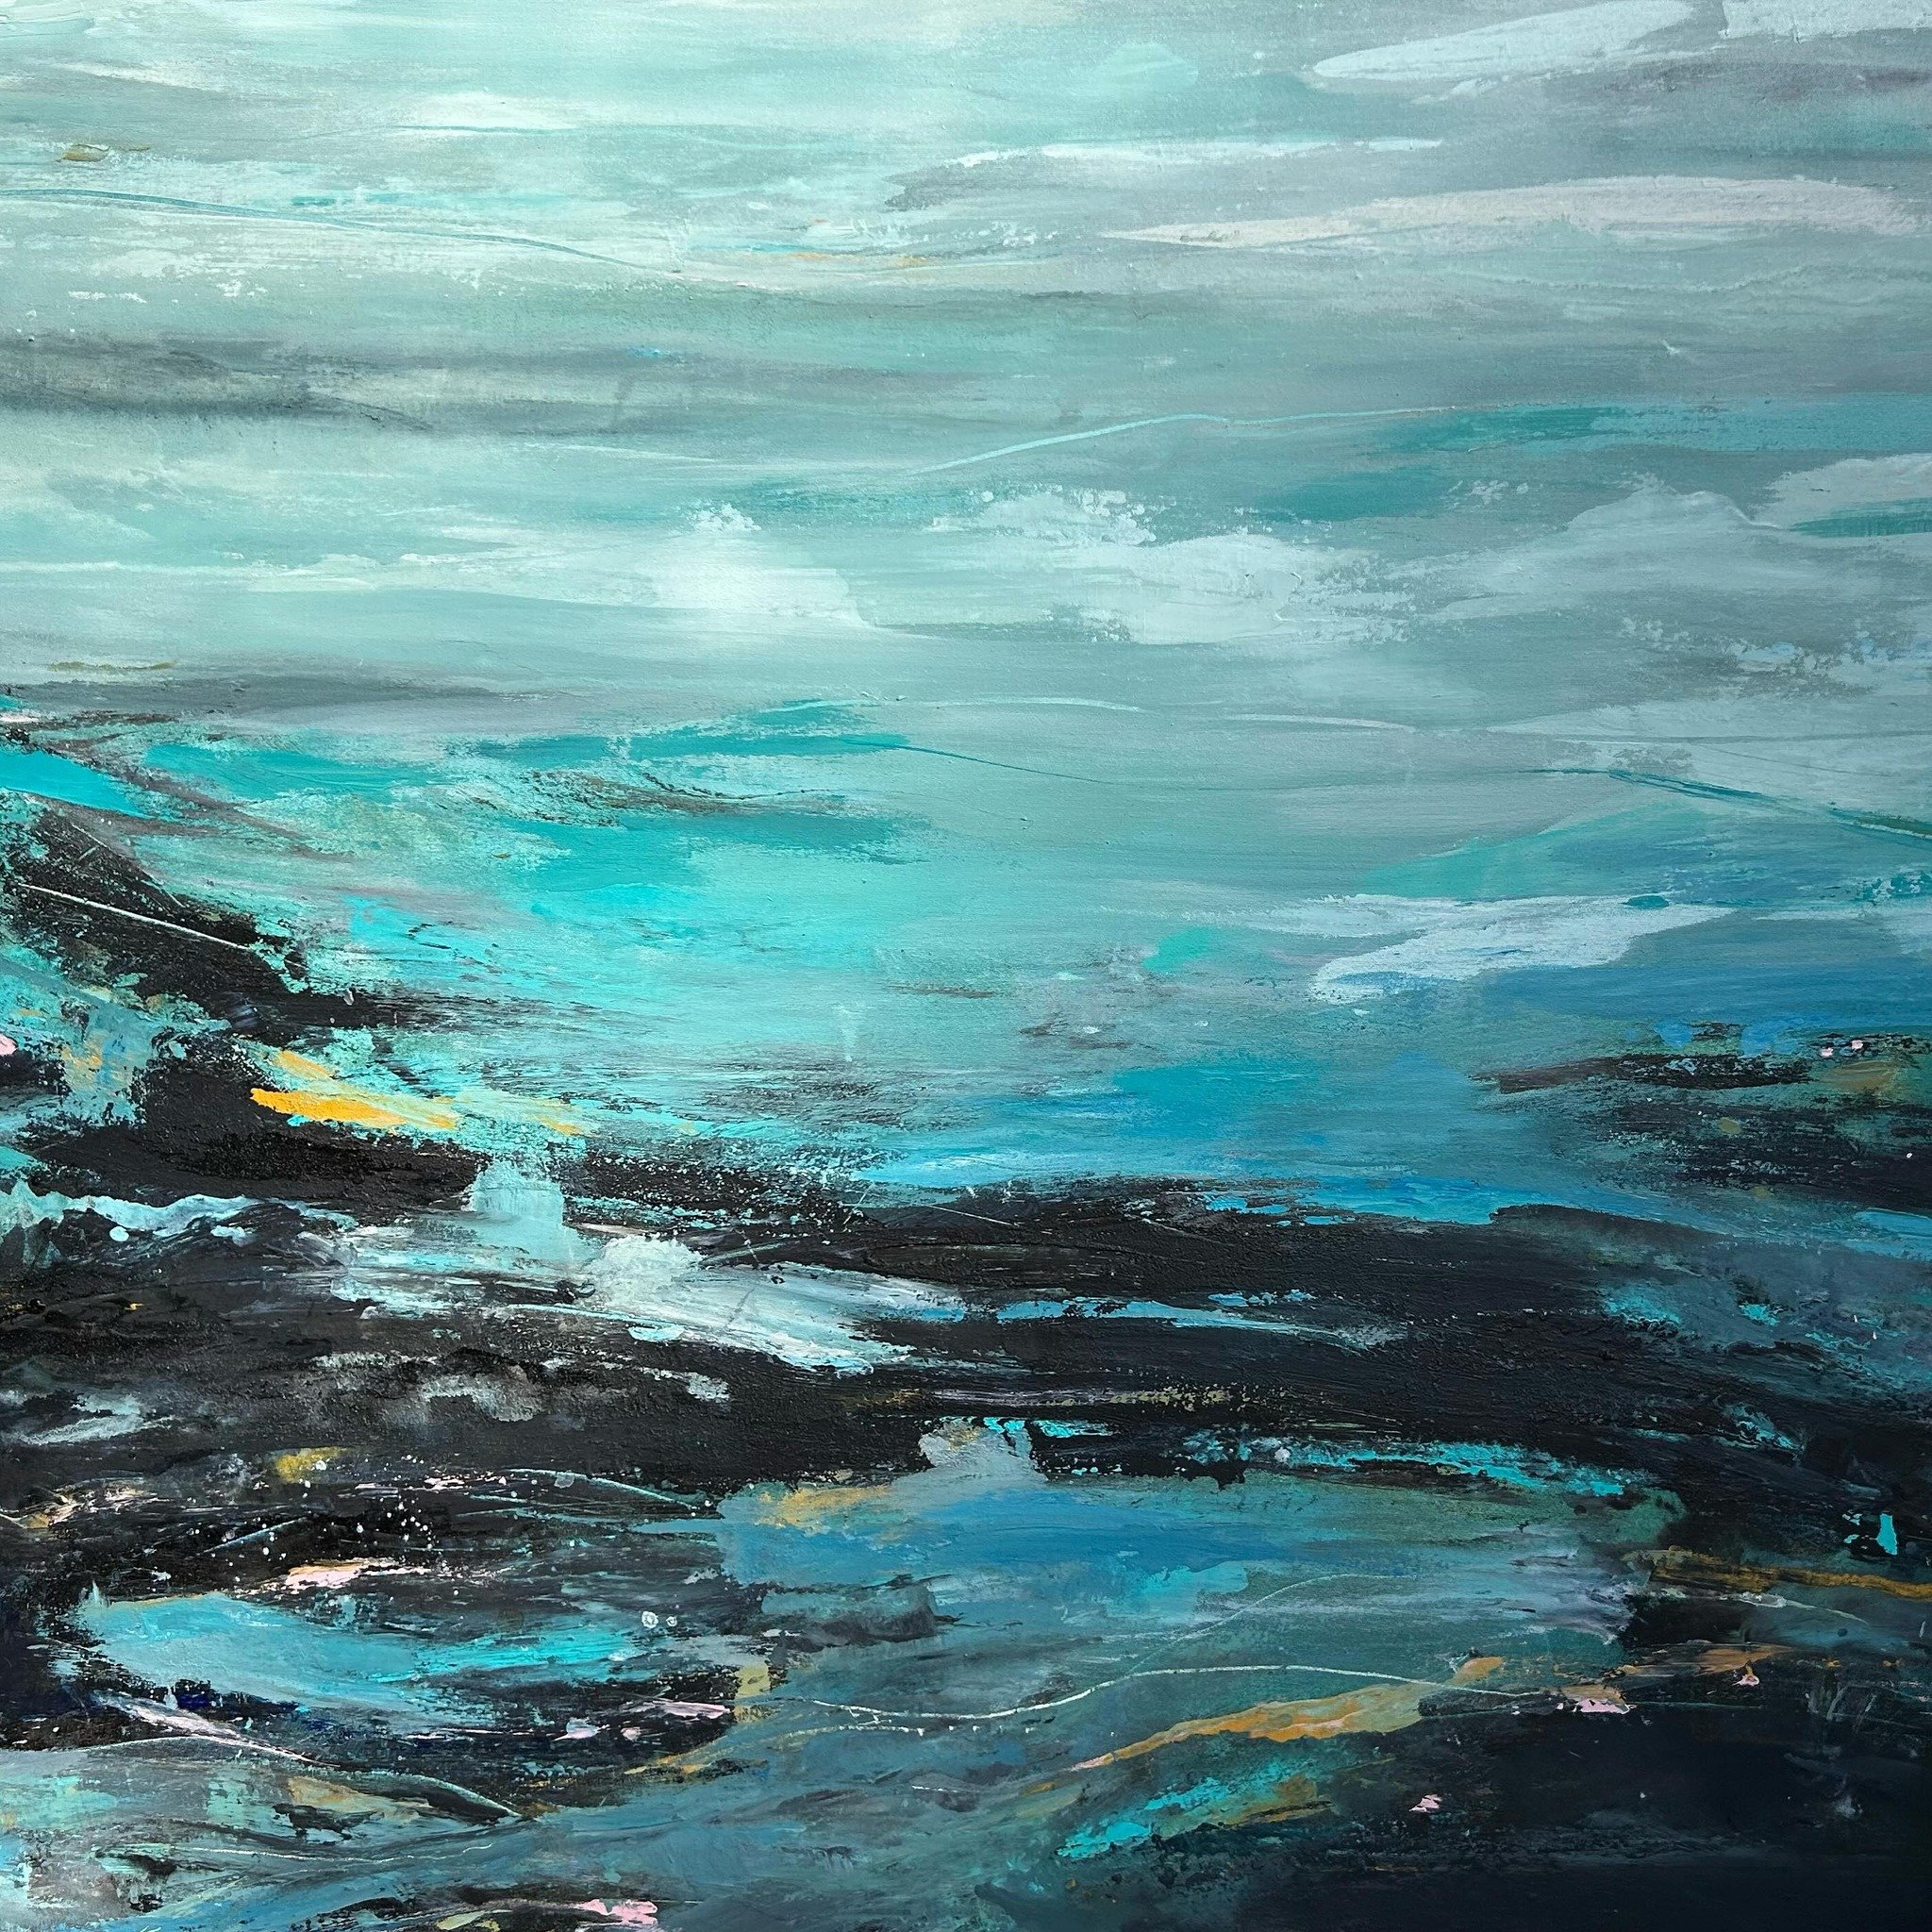 The last post inspired me to create this abstracted coastal rock platform artwork that leads us out into the ocean. Really loved seeing this come together- the ocean is a place that makes me feel really alive - hope my energy is not too strongly expr